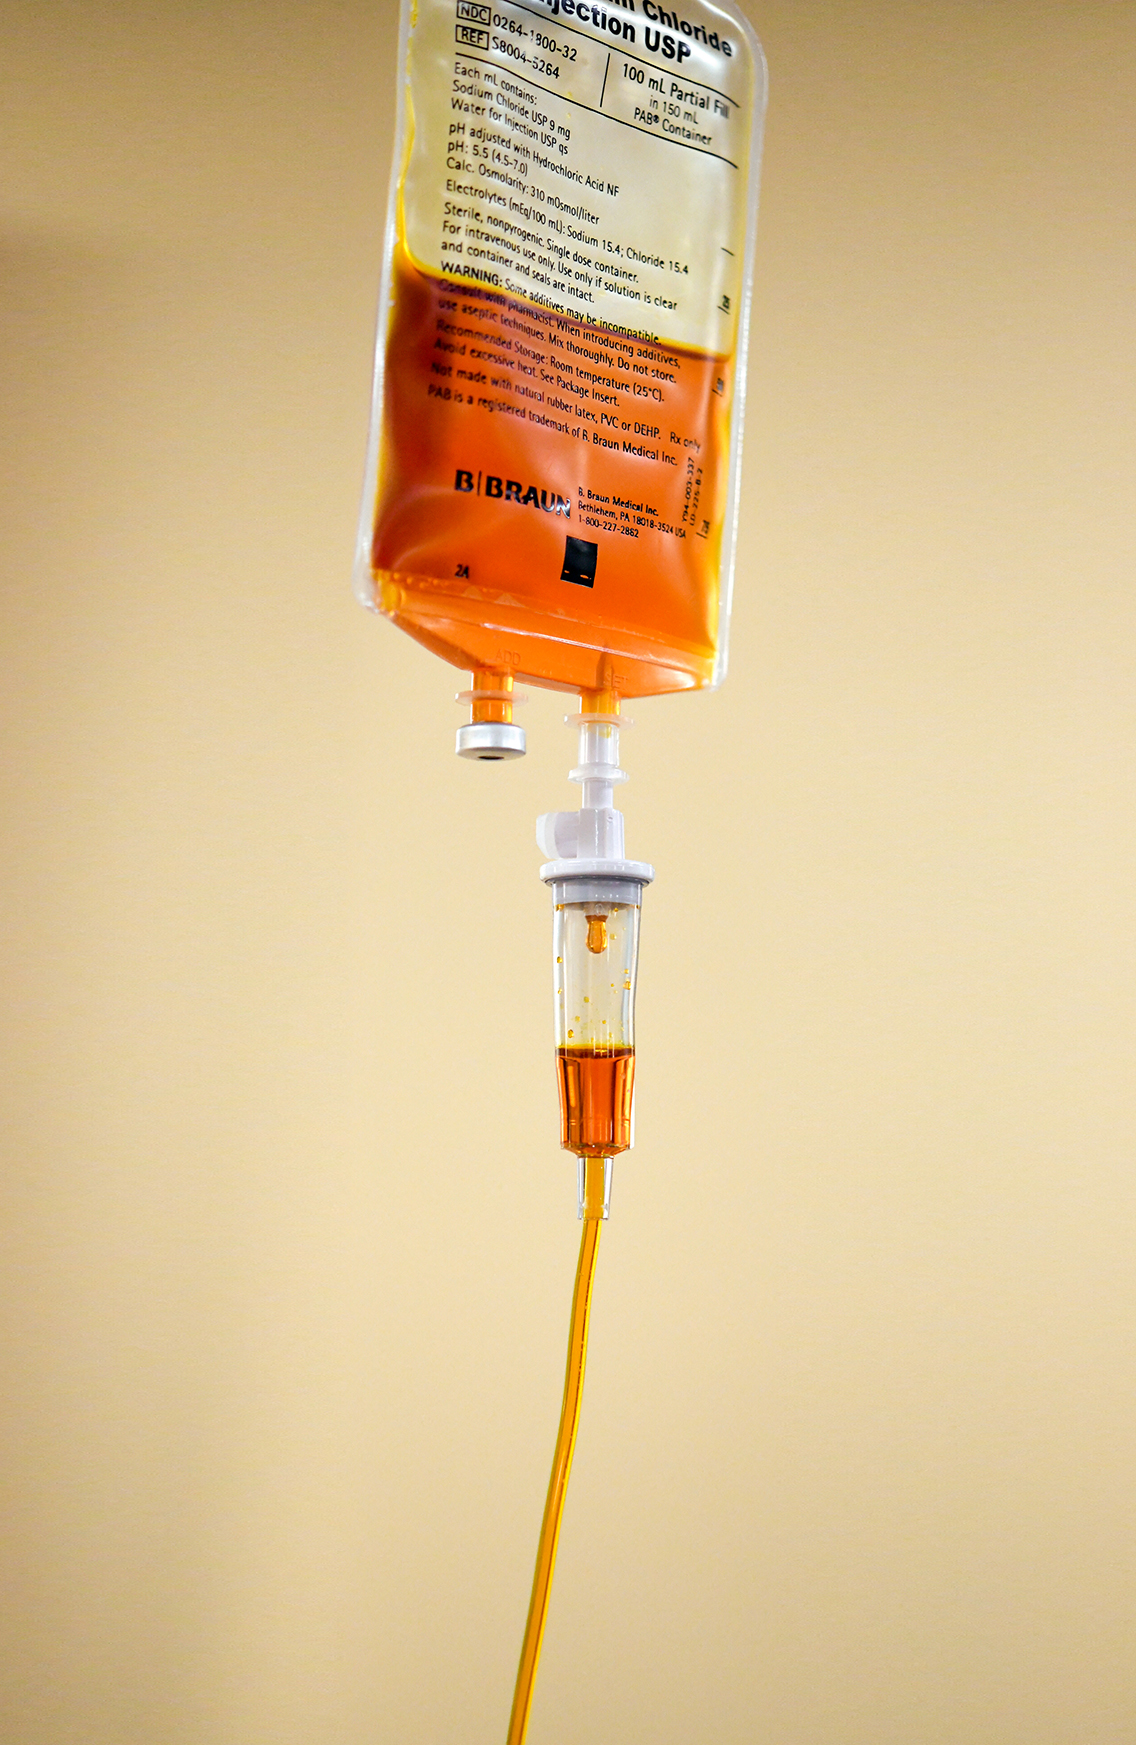 An IV therapy IV bag filled with curcumin.